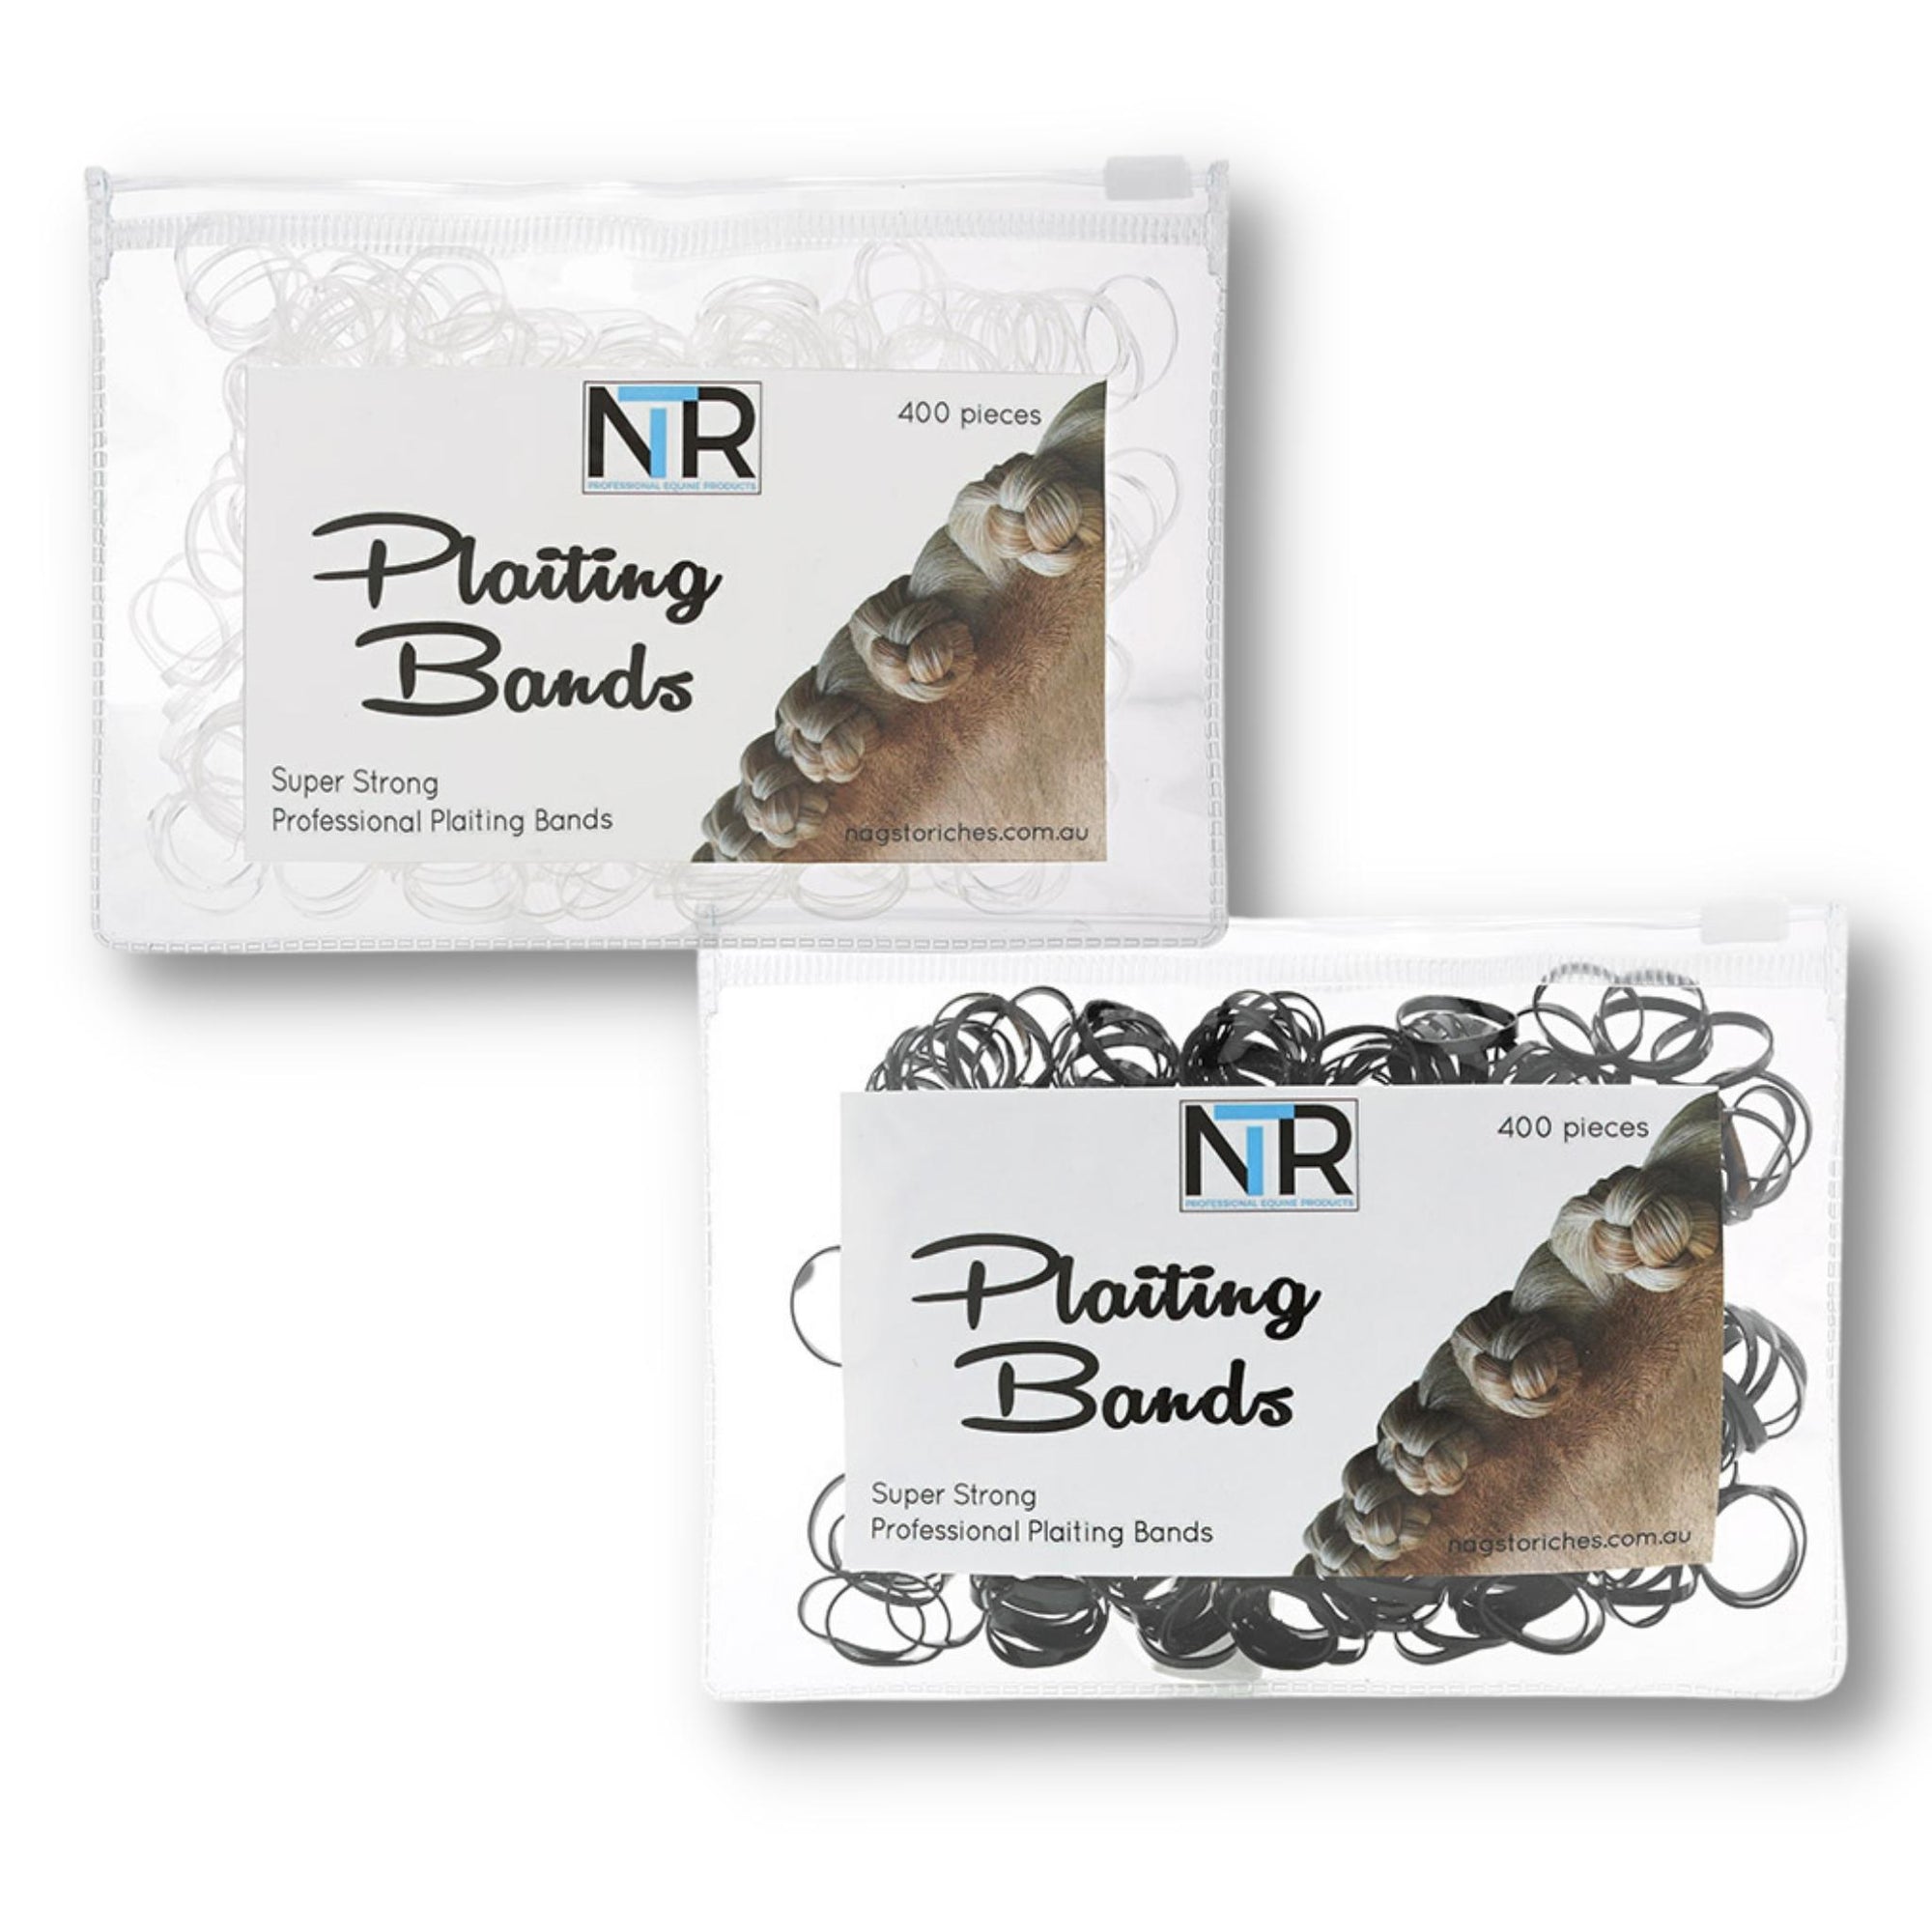 Black and clear plaiting bands in clear bags.